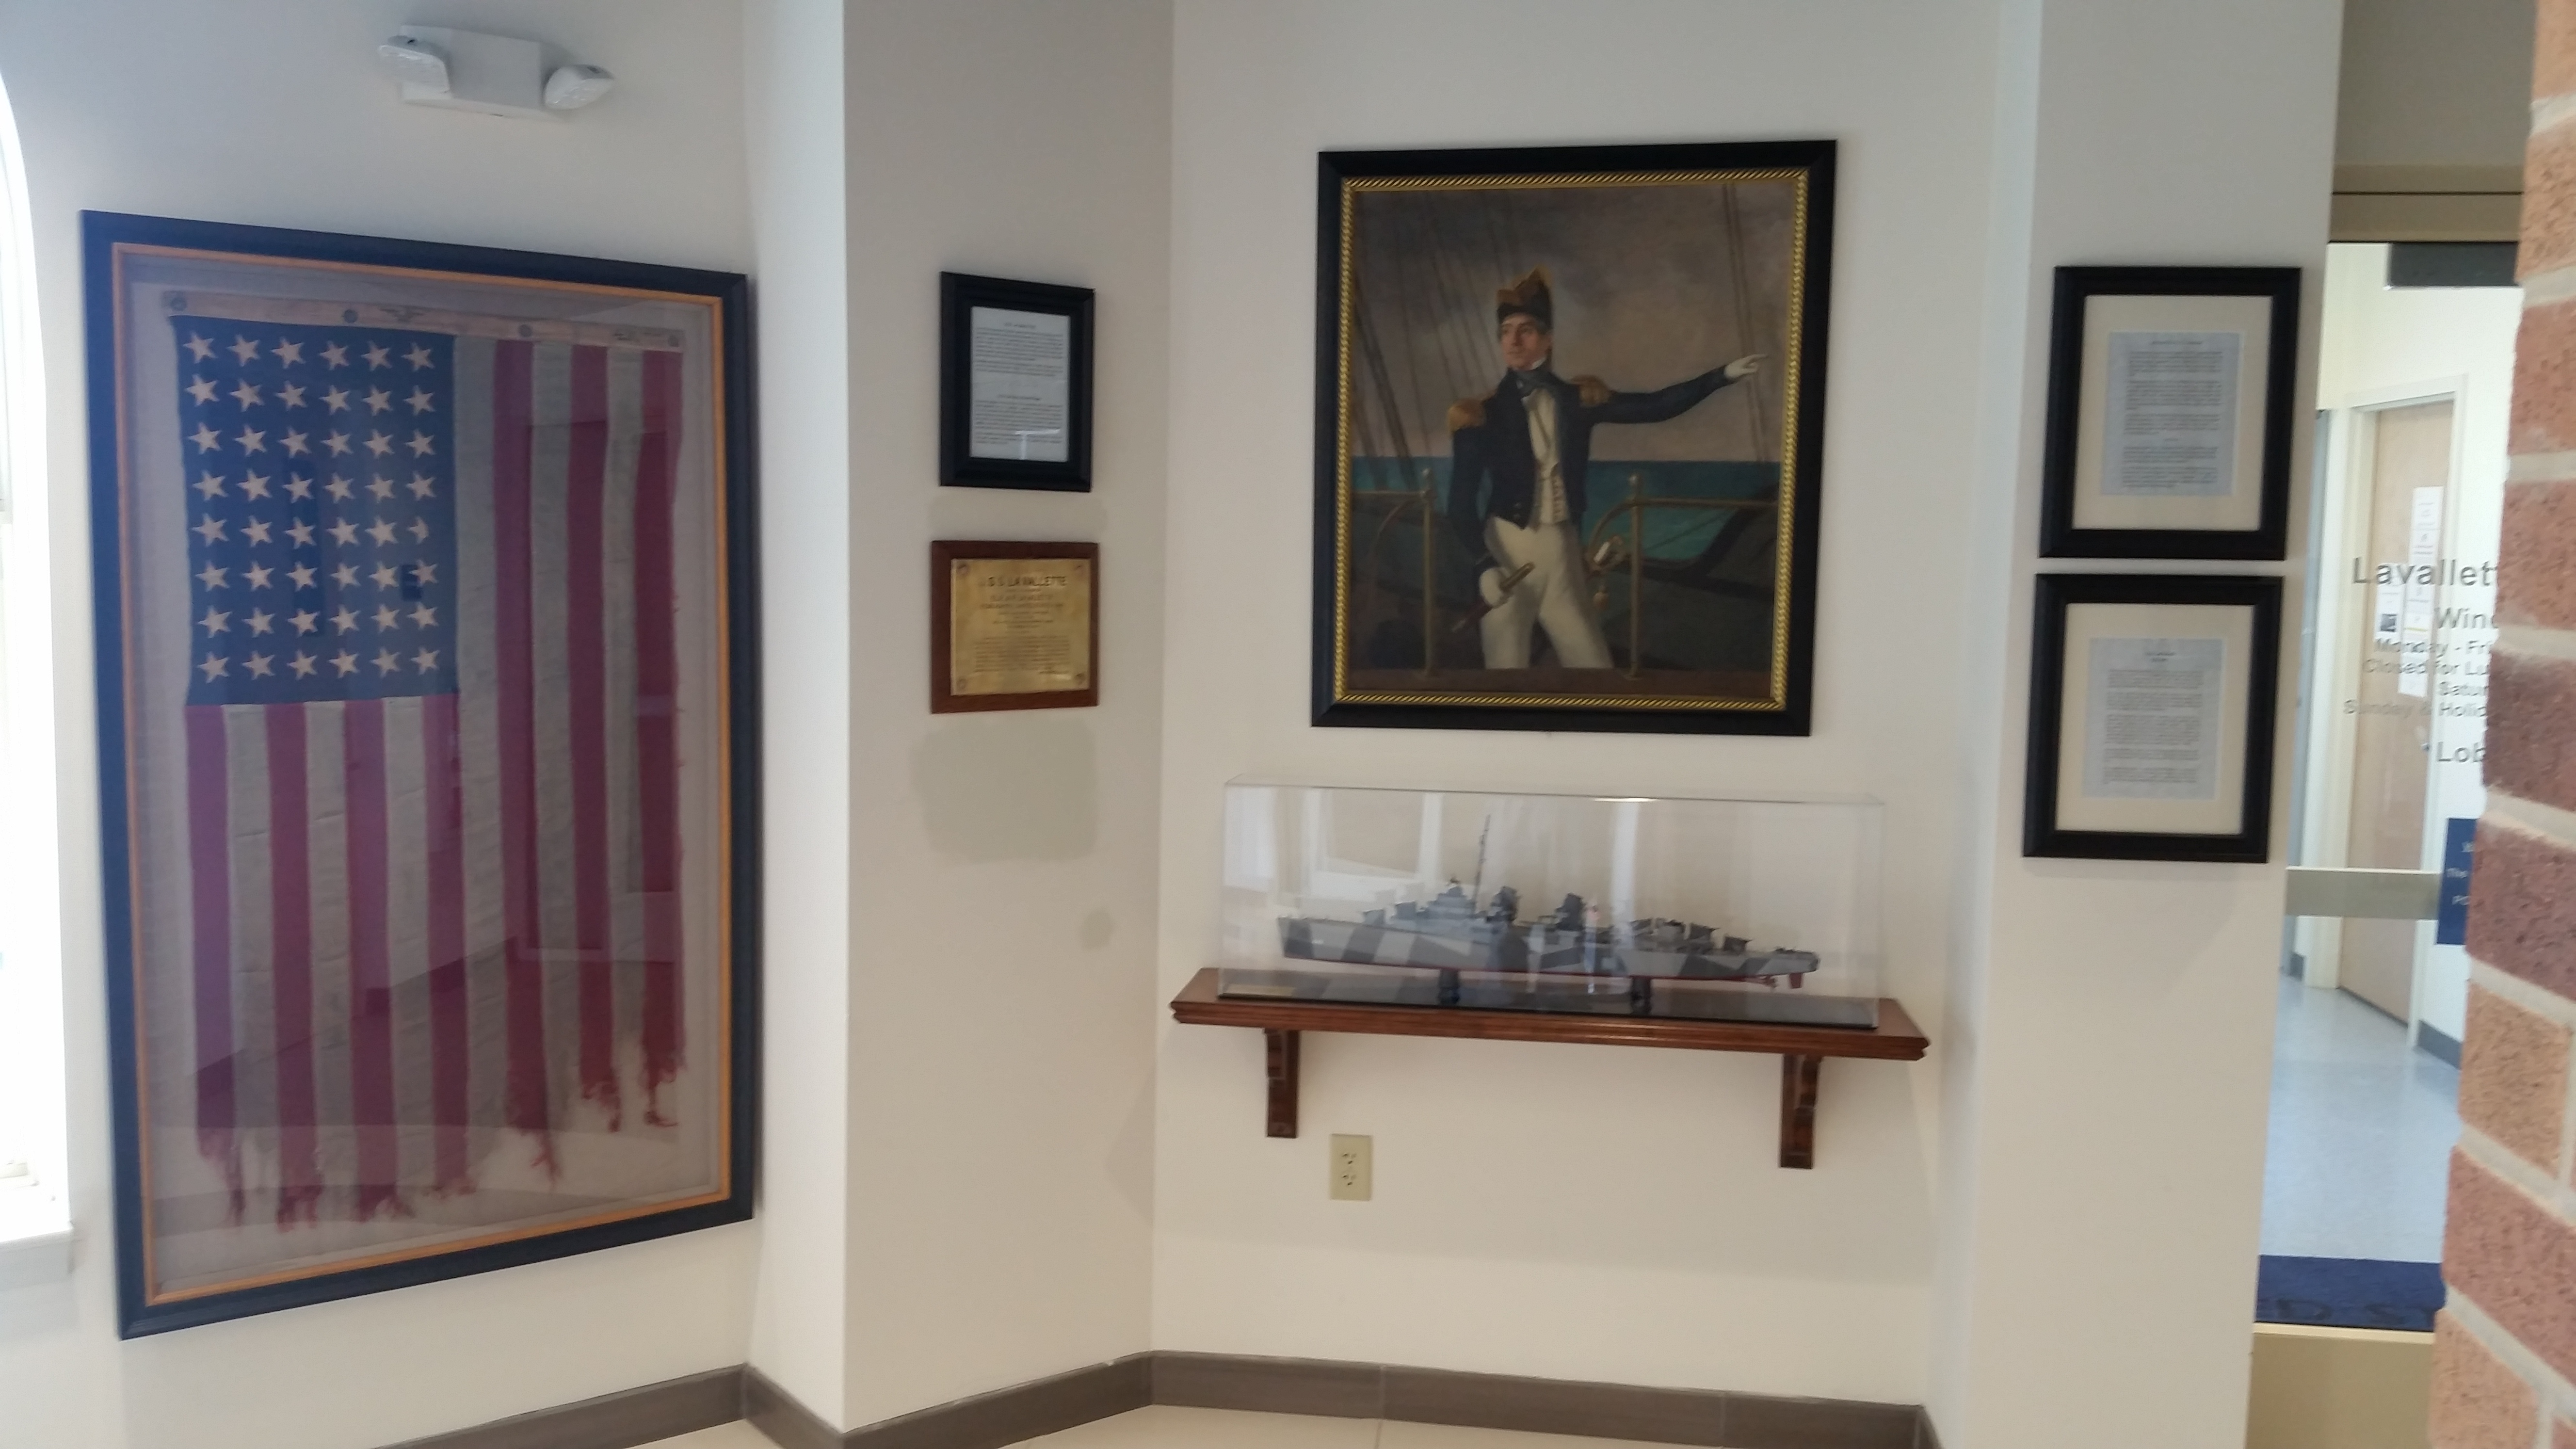 USS LaVallette and Admiral Lavallette Display